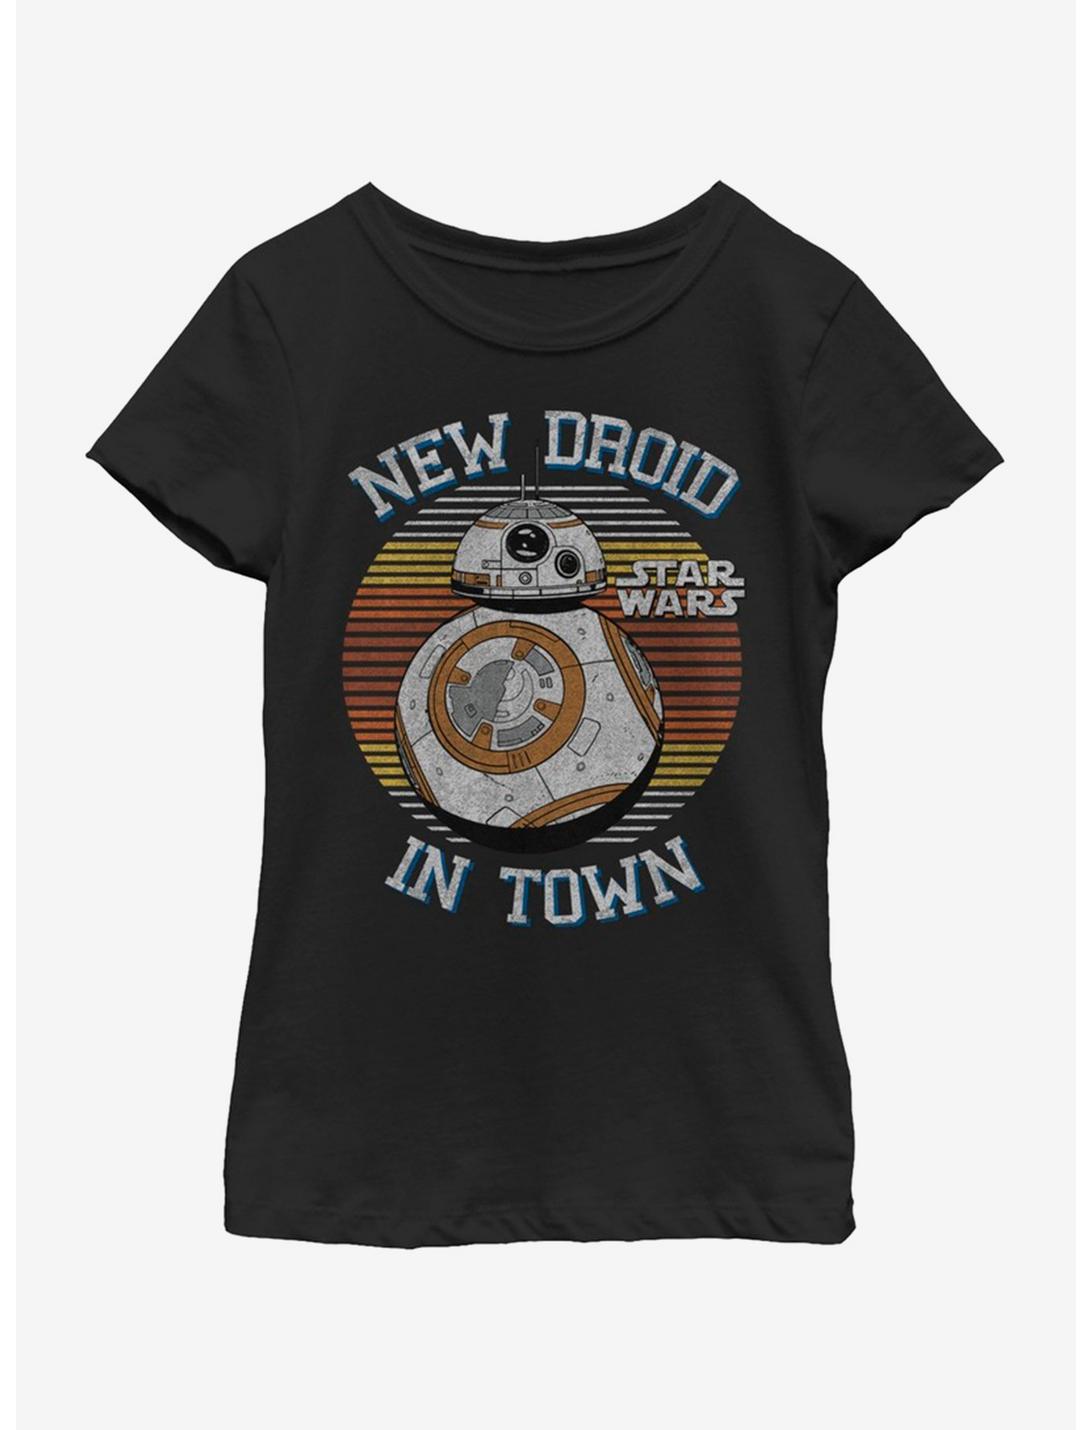 Star Wars The Force Awakens New Droid Youth Girls T-Shirt, BLACK, hi-res